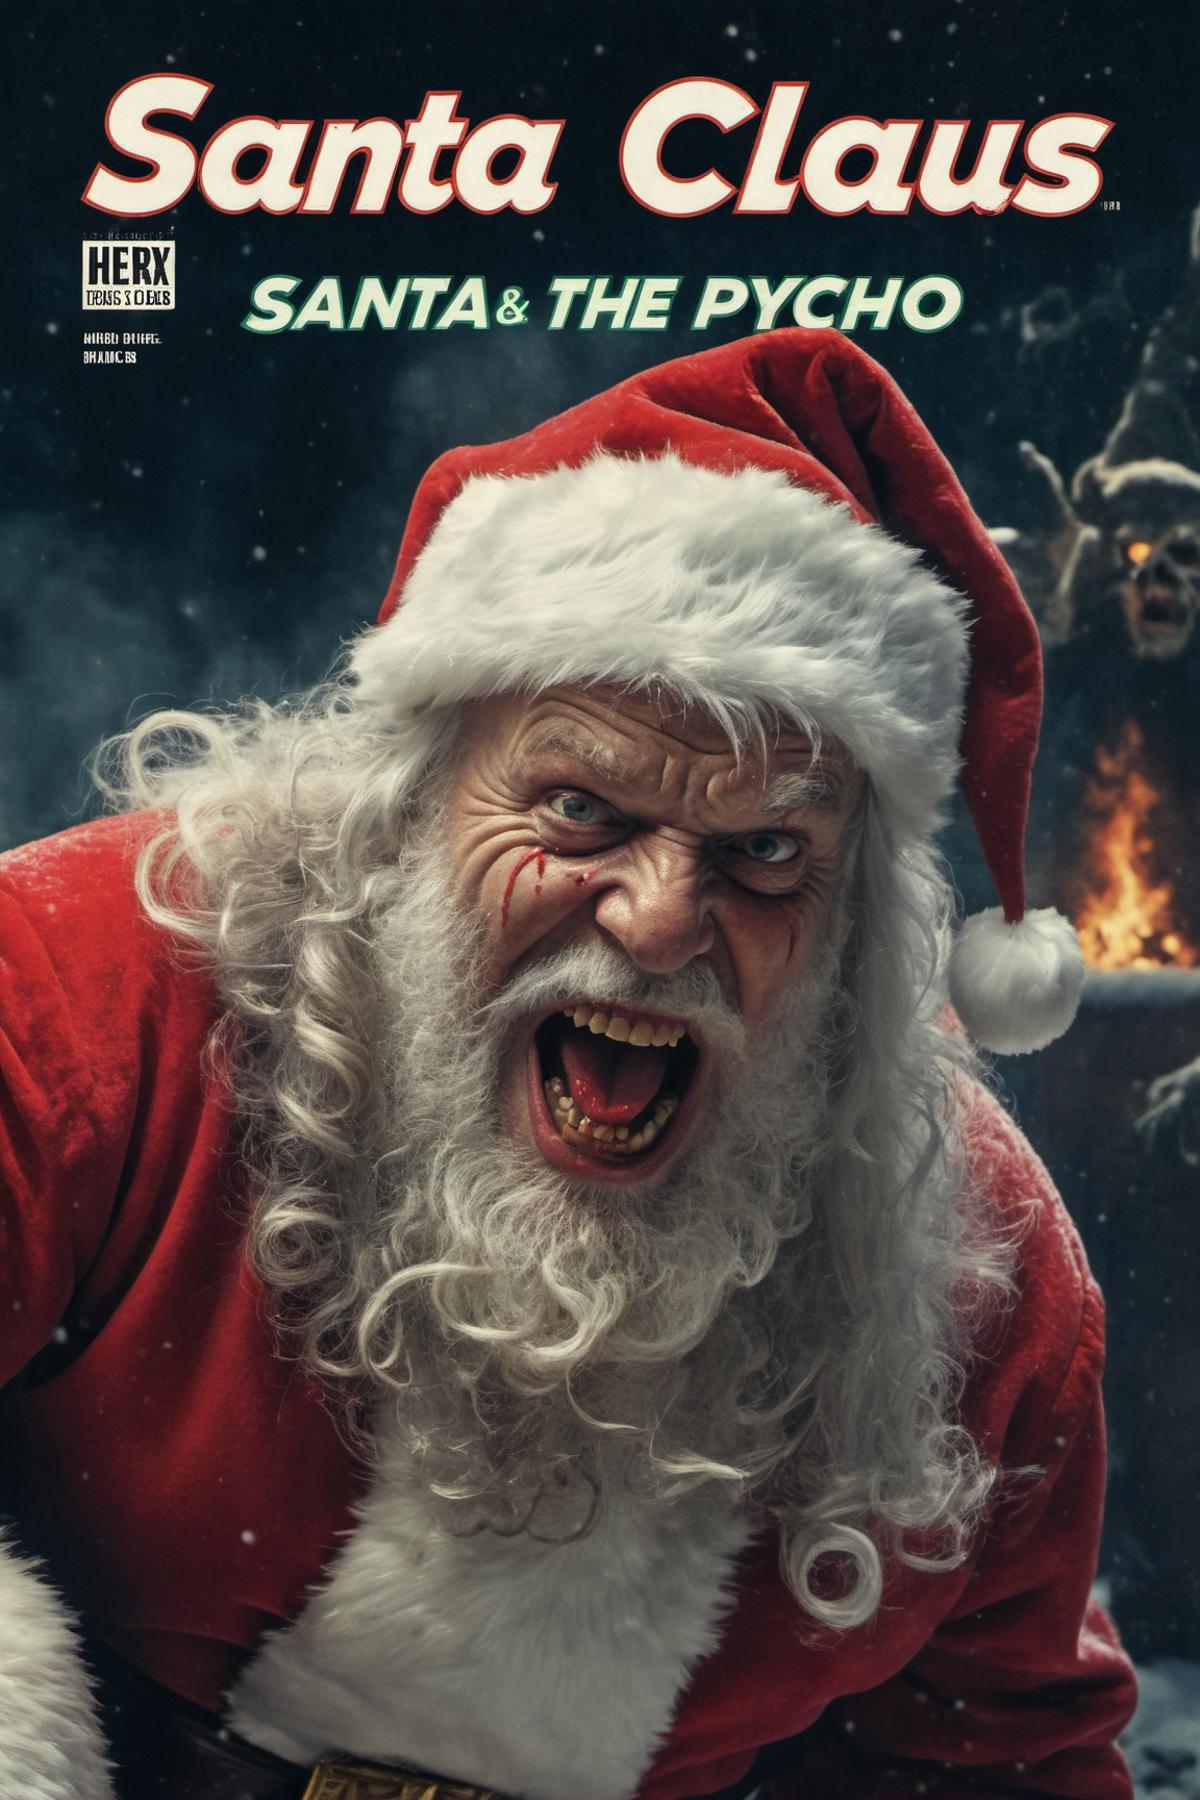 Santa Claus with a scary face and a red hat.